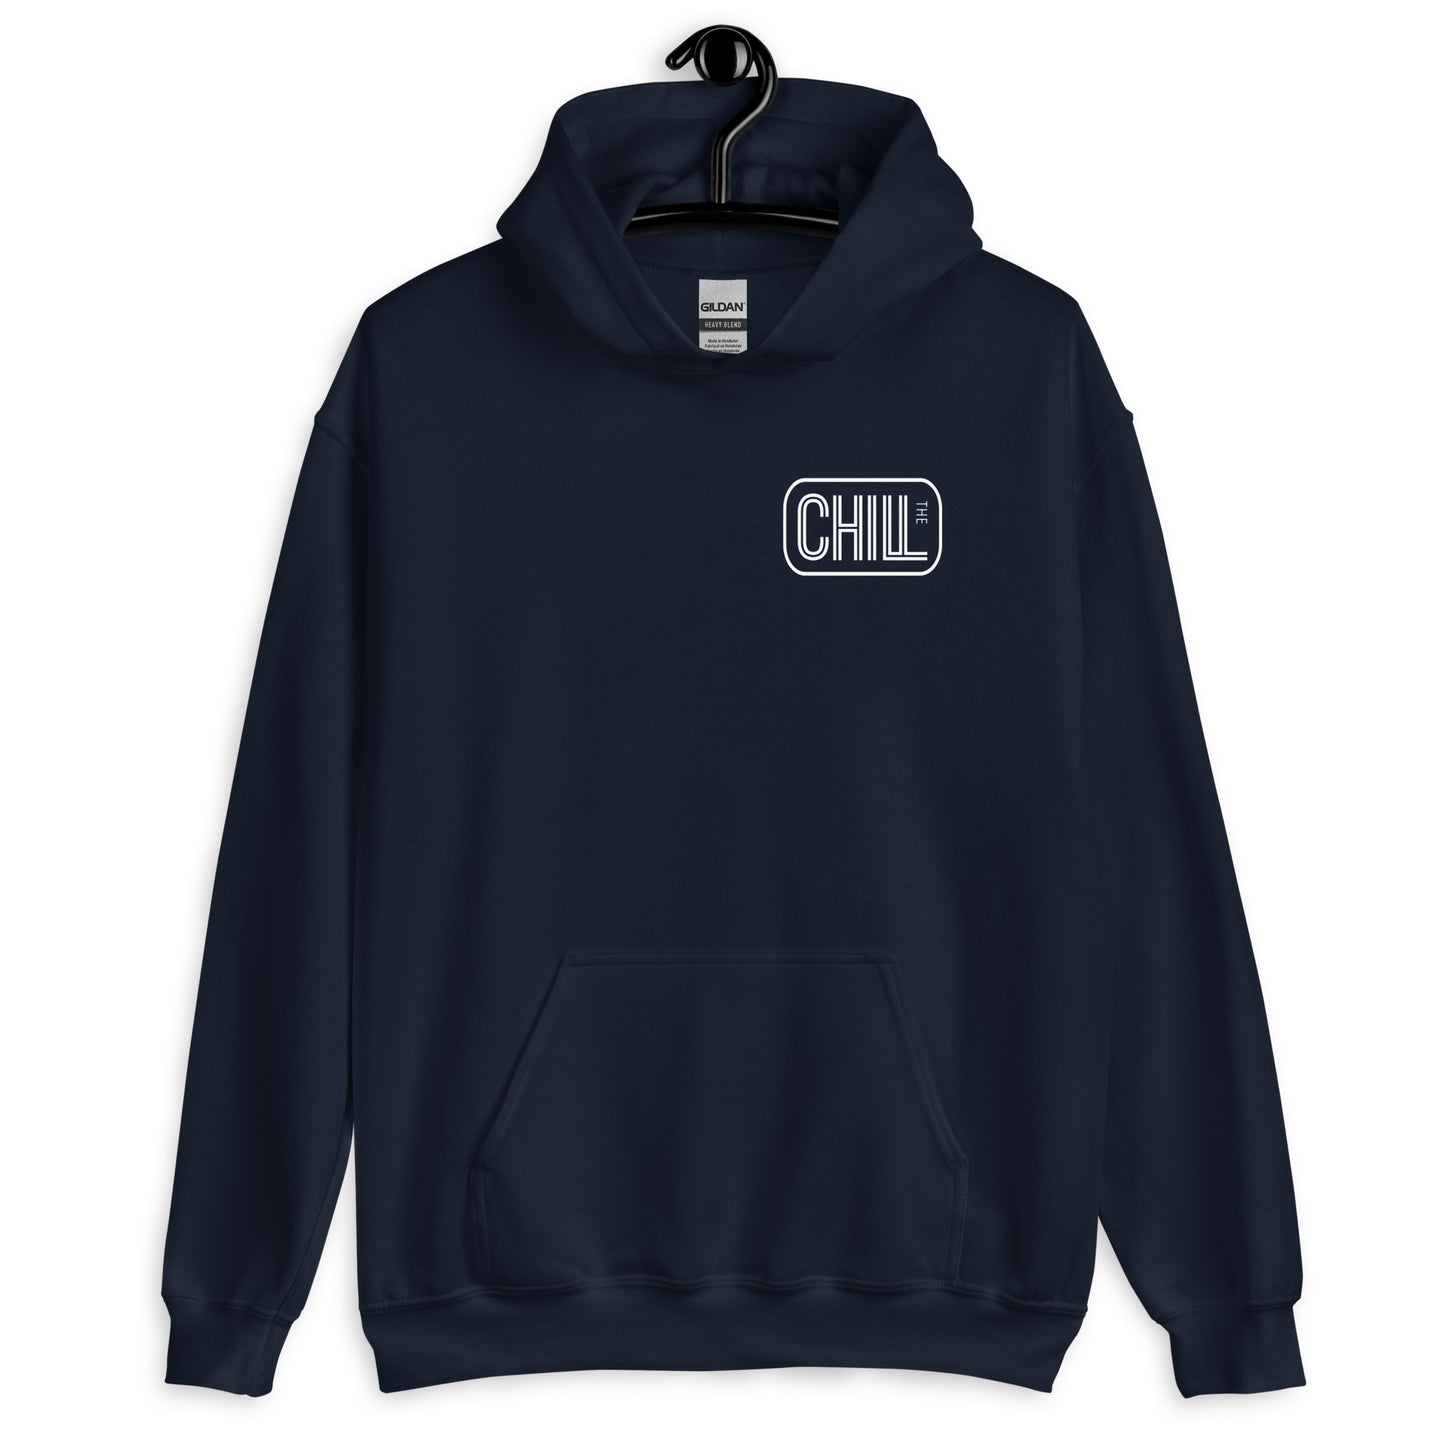 The Chill Smoothie Hoodie